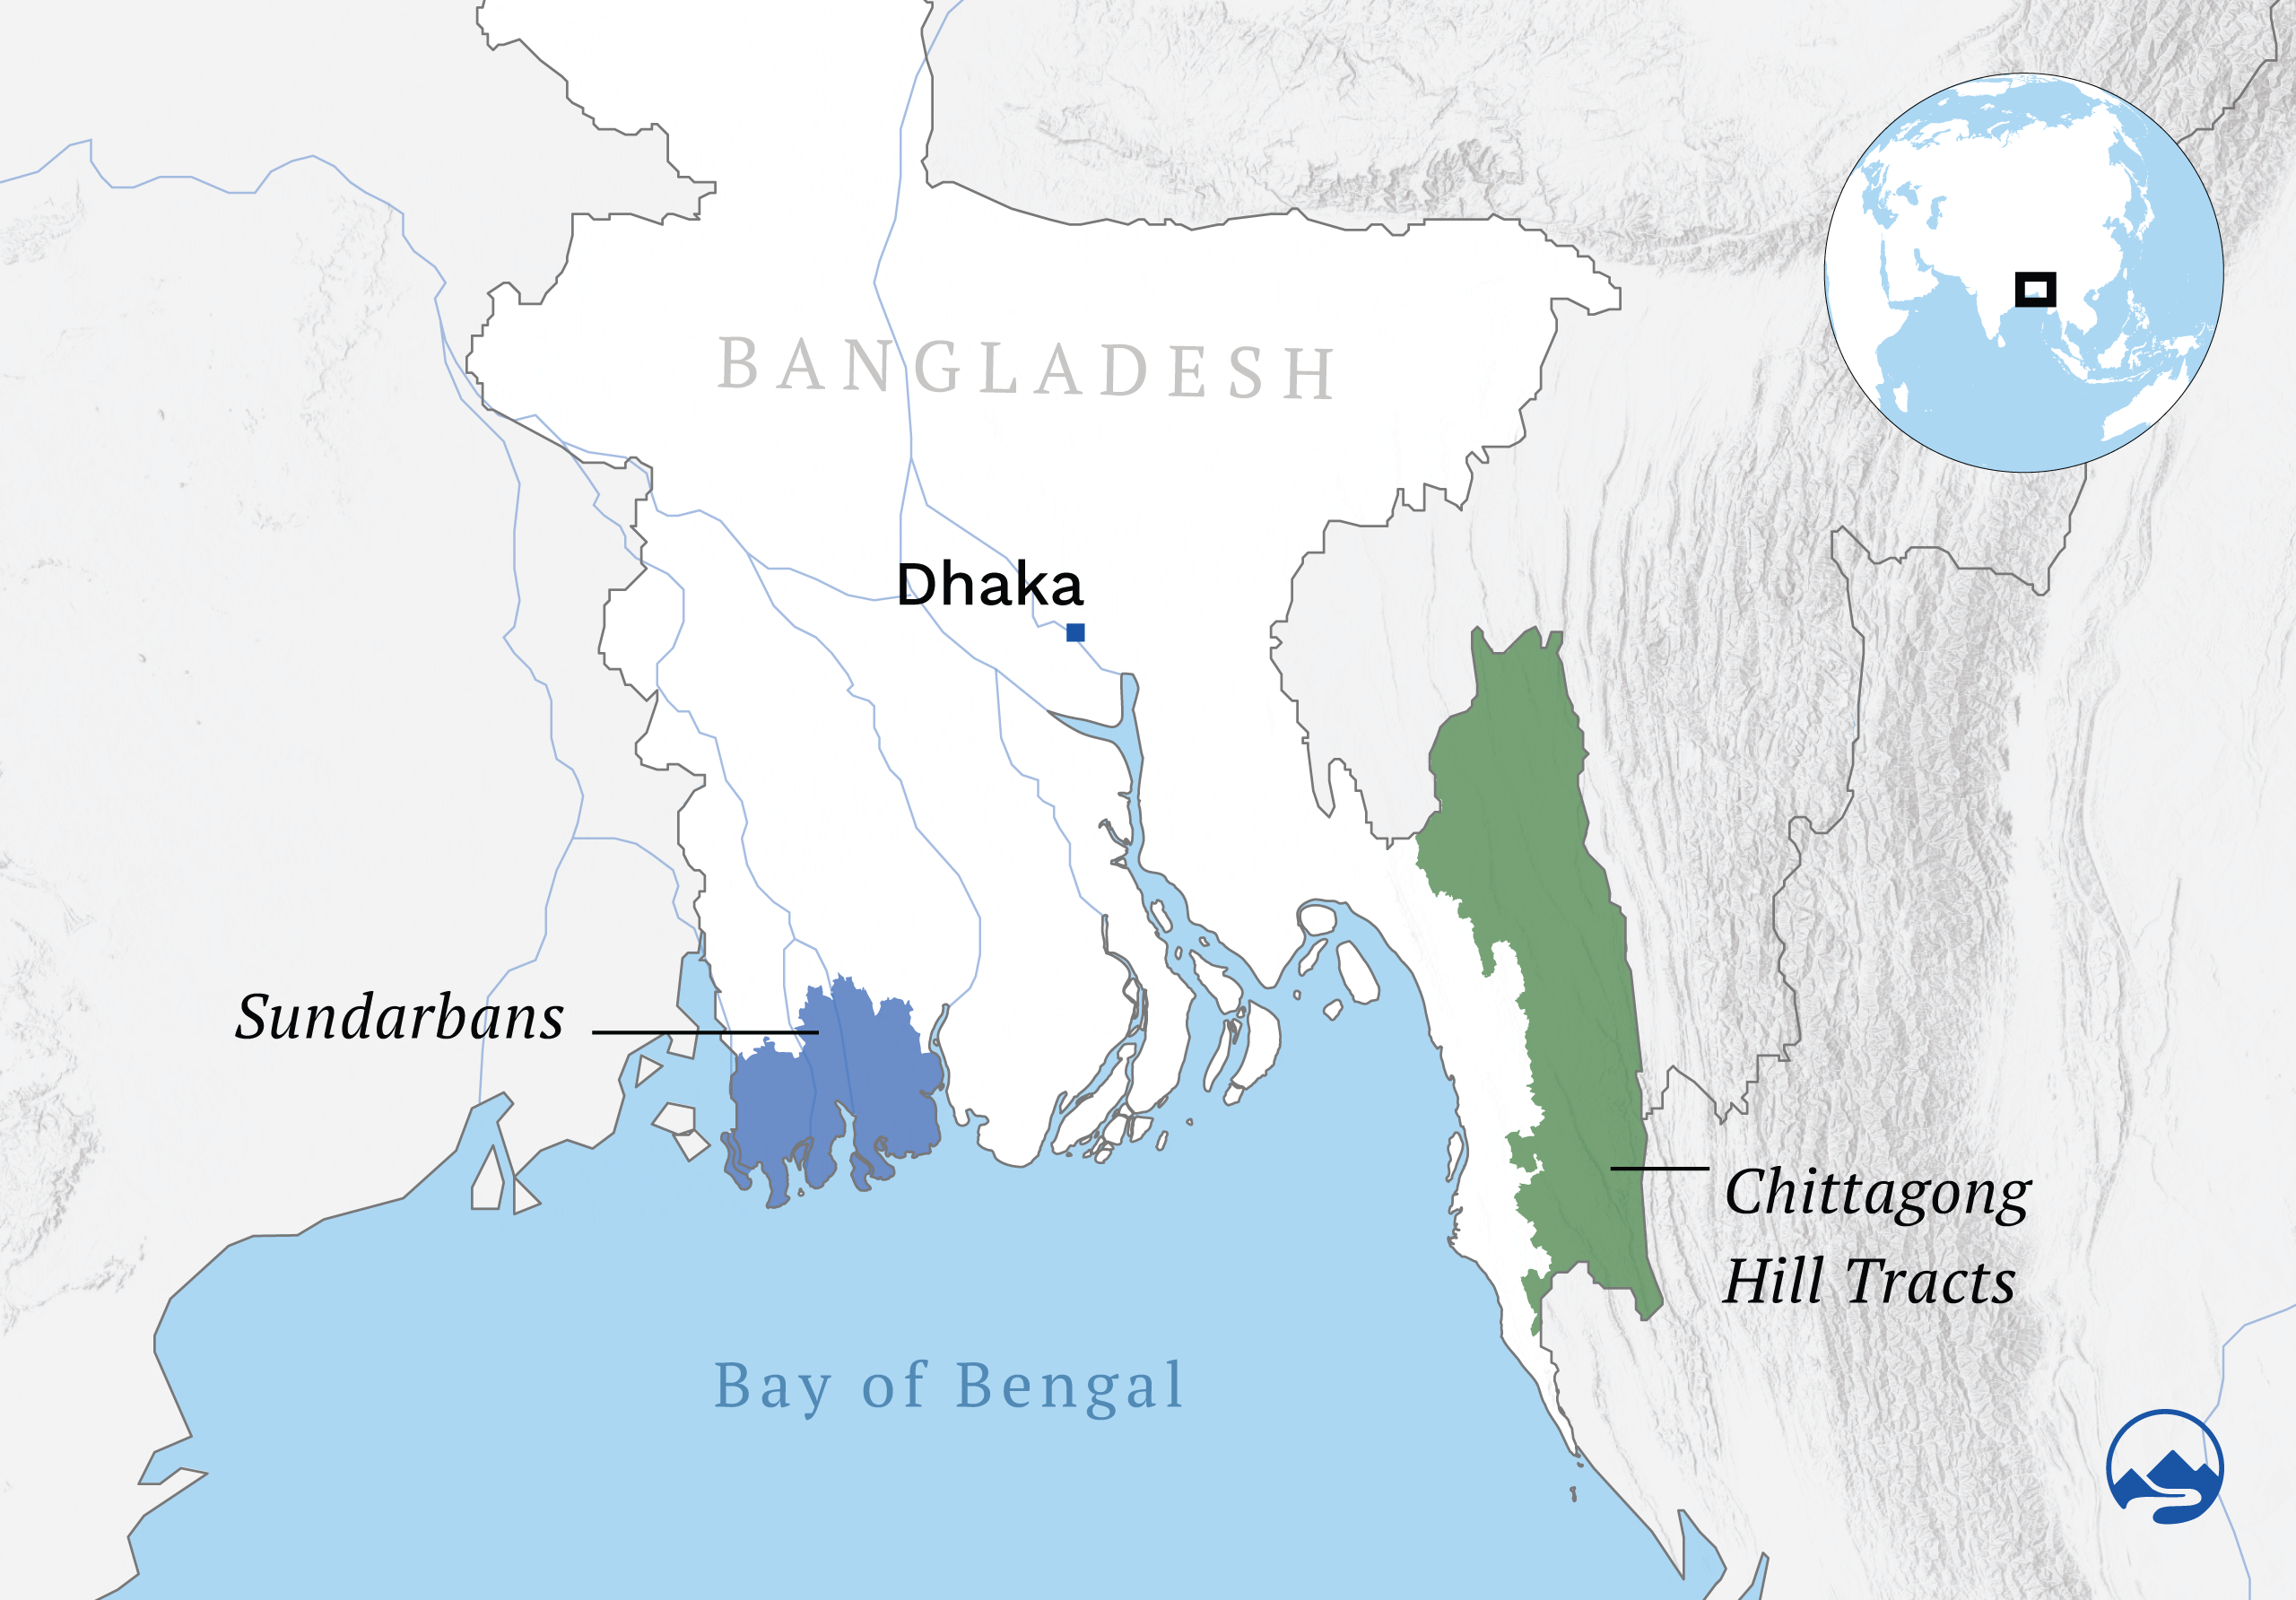 A map showing the geolocation of Chittagong Hill Tracts and Sundarbans